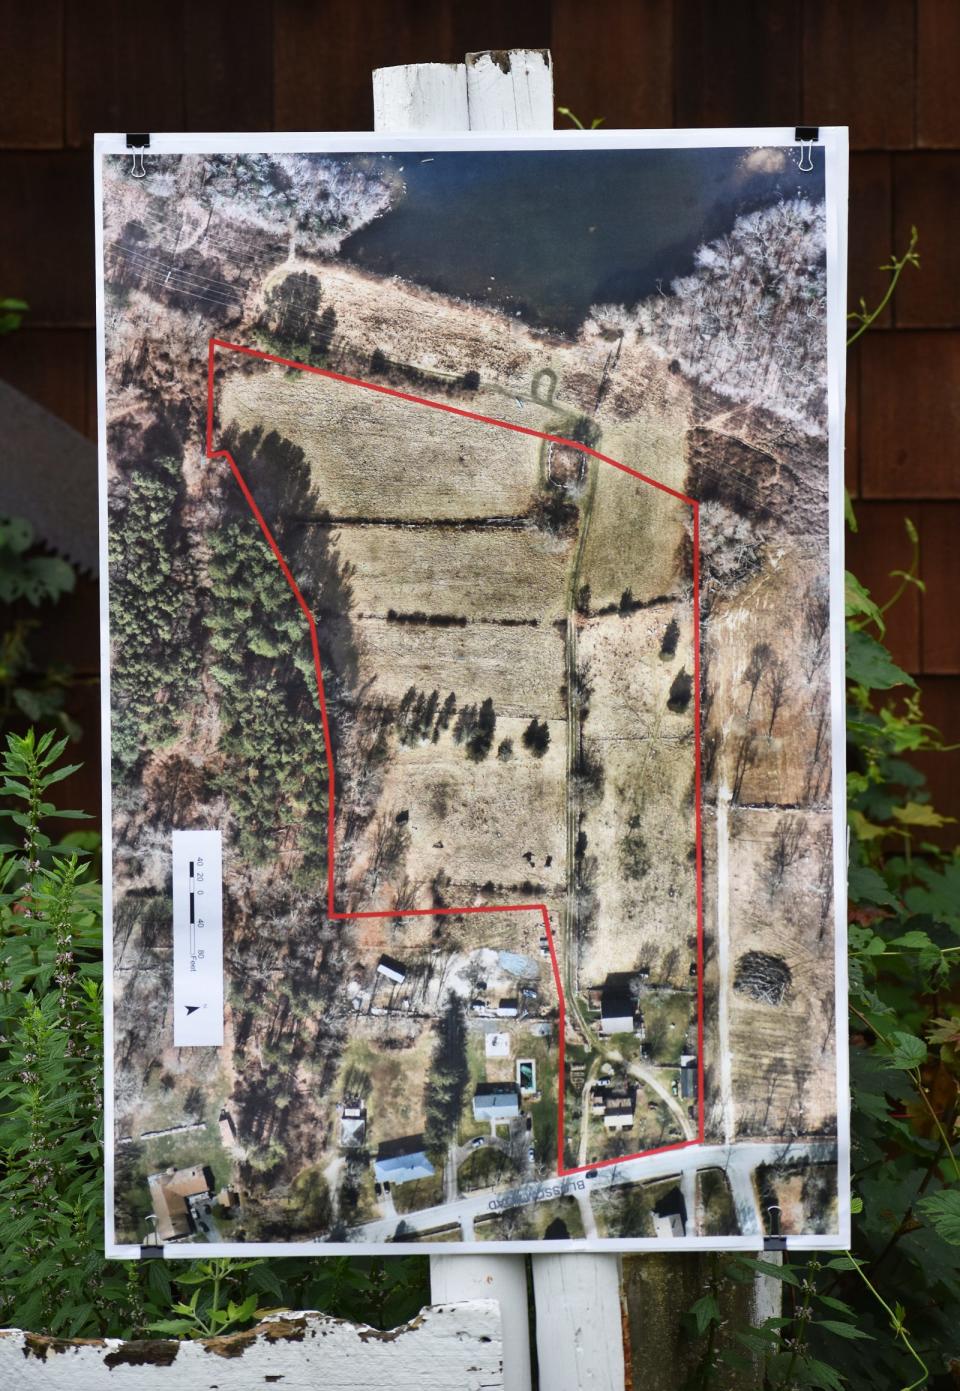 A map shows the extent of the Adirondack Farm property on Blossom Road in Fall River, which will be used as the Southeastern Massachusetts Bioreserve's new environmental education center.